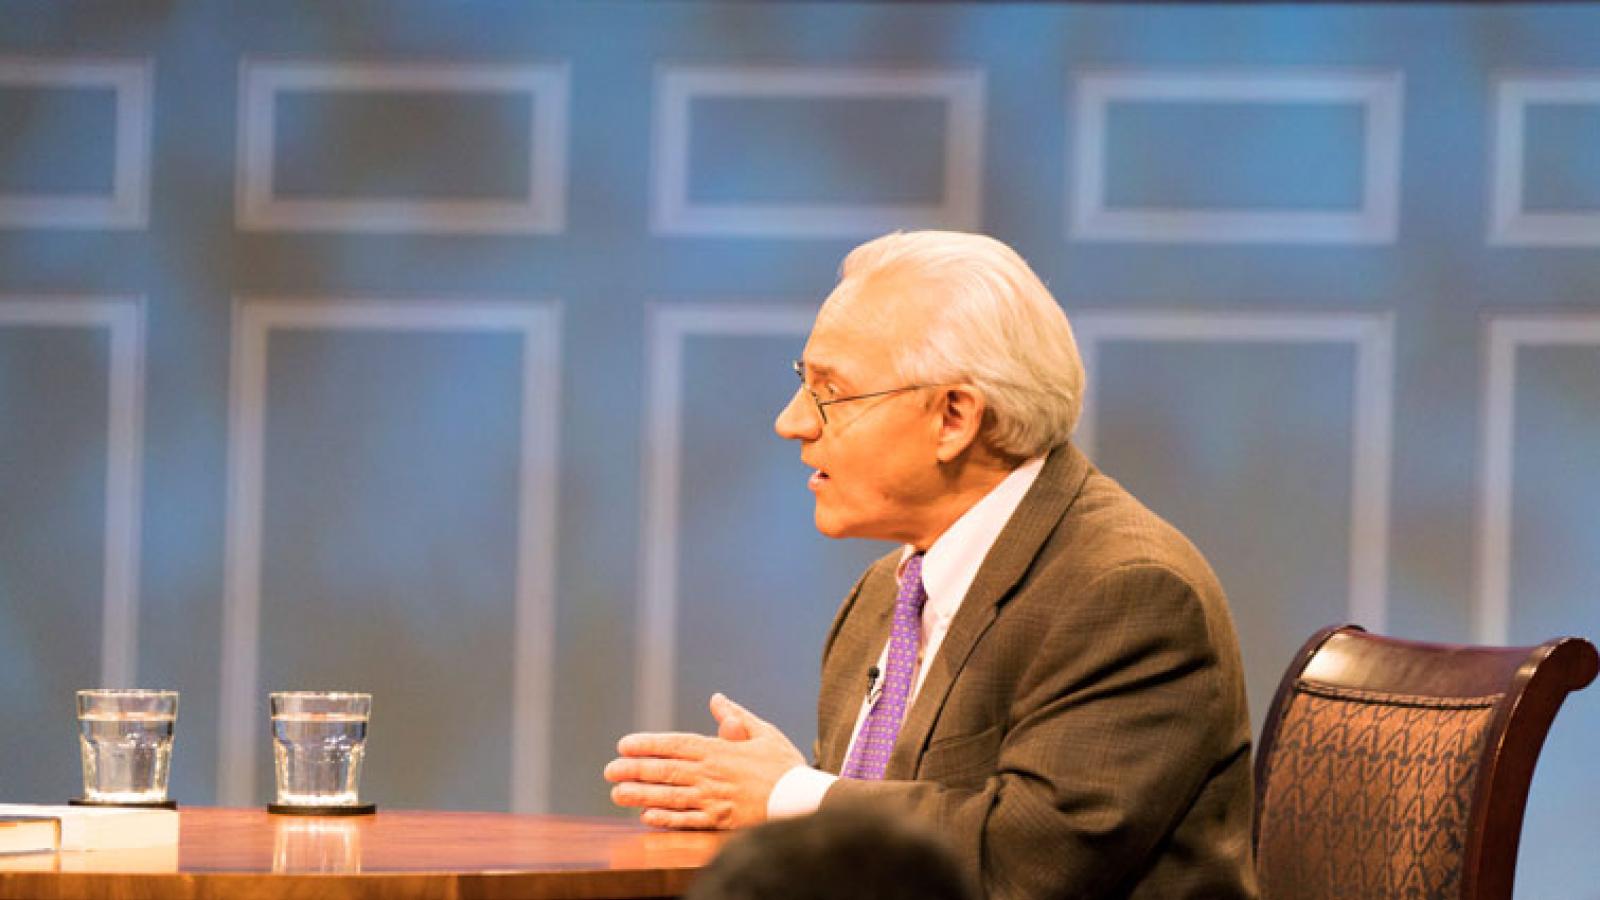 Washington Post columnist E.J. Dionne takes questions on the early days of the Trump Presidency from the American Forum studio audience